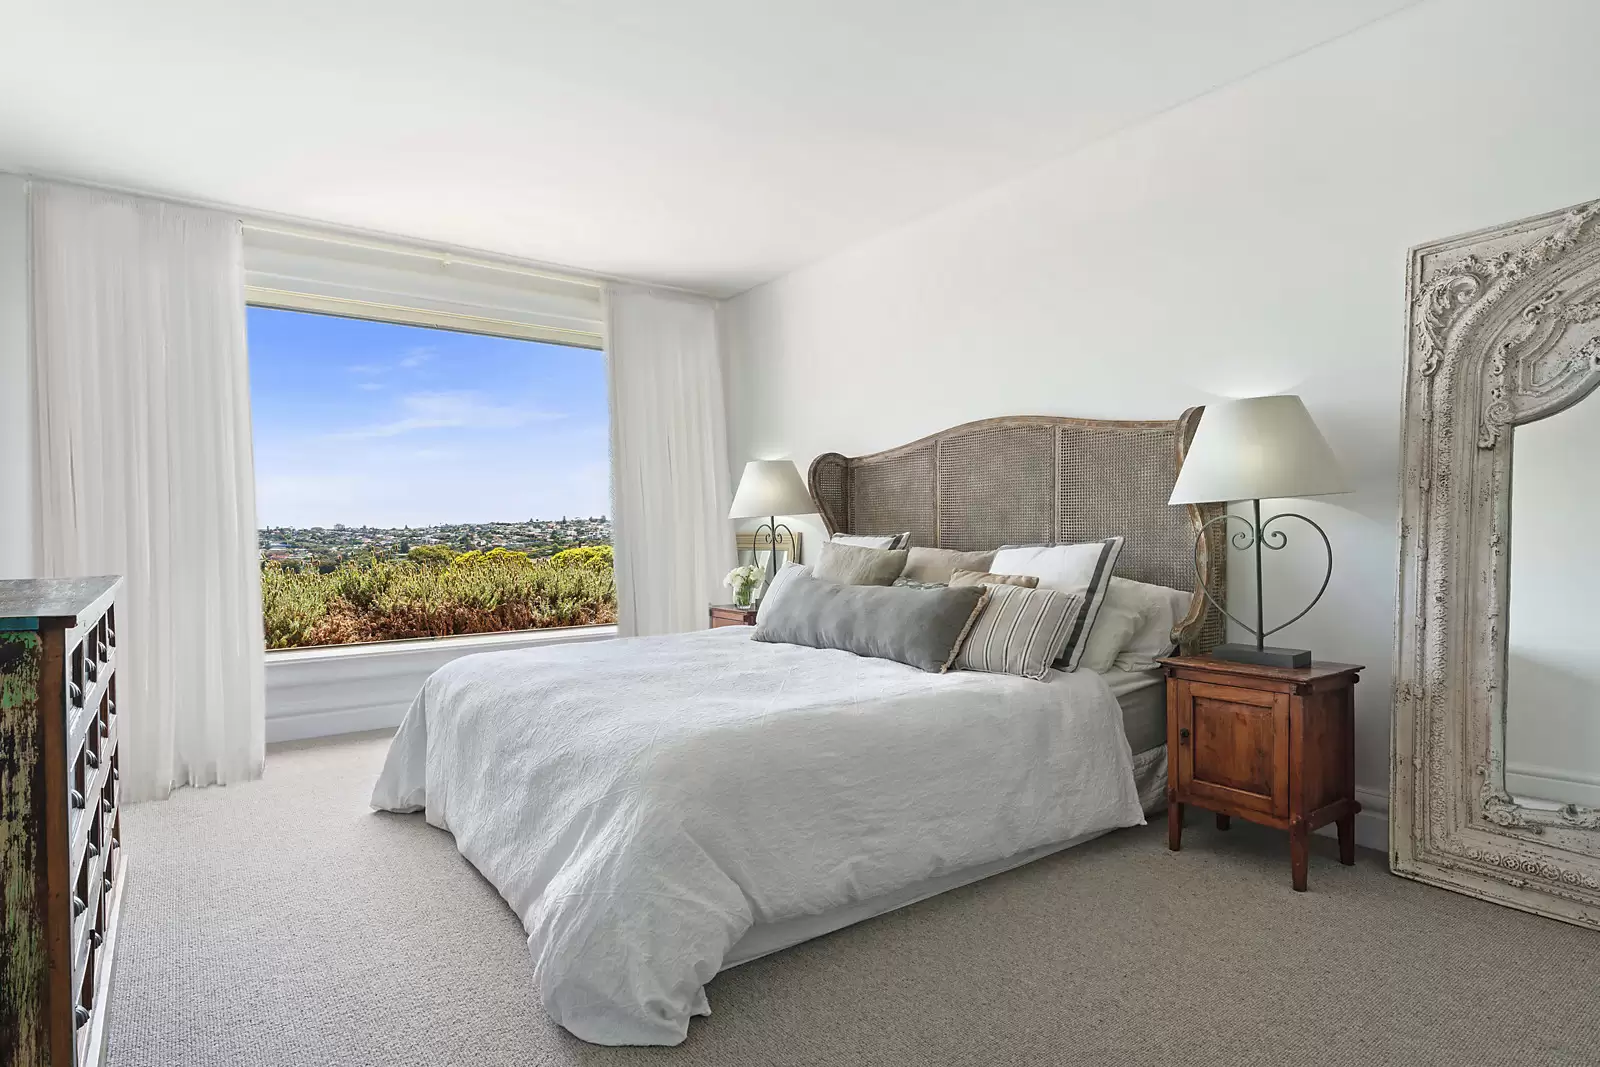 Photo #15: Residence 1/15 Benelong Crescent, Bellevue Hill - For Sale by Sydney Sotheby's International Realty